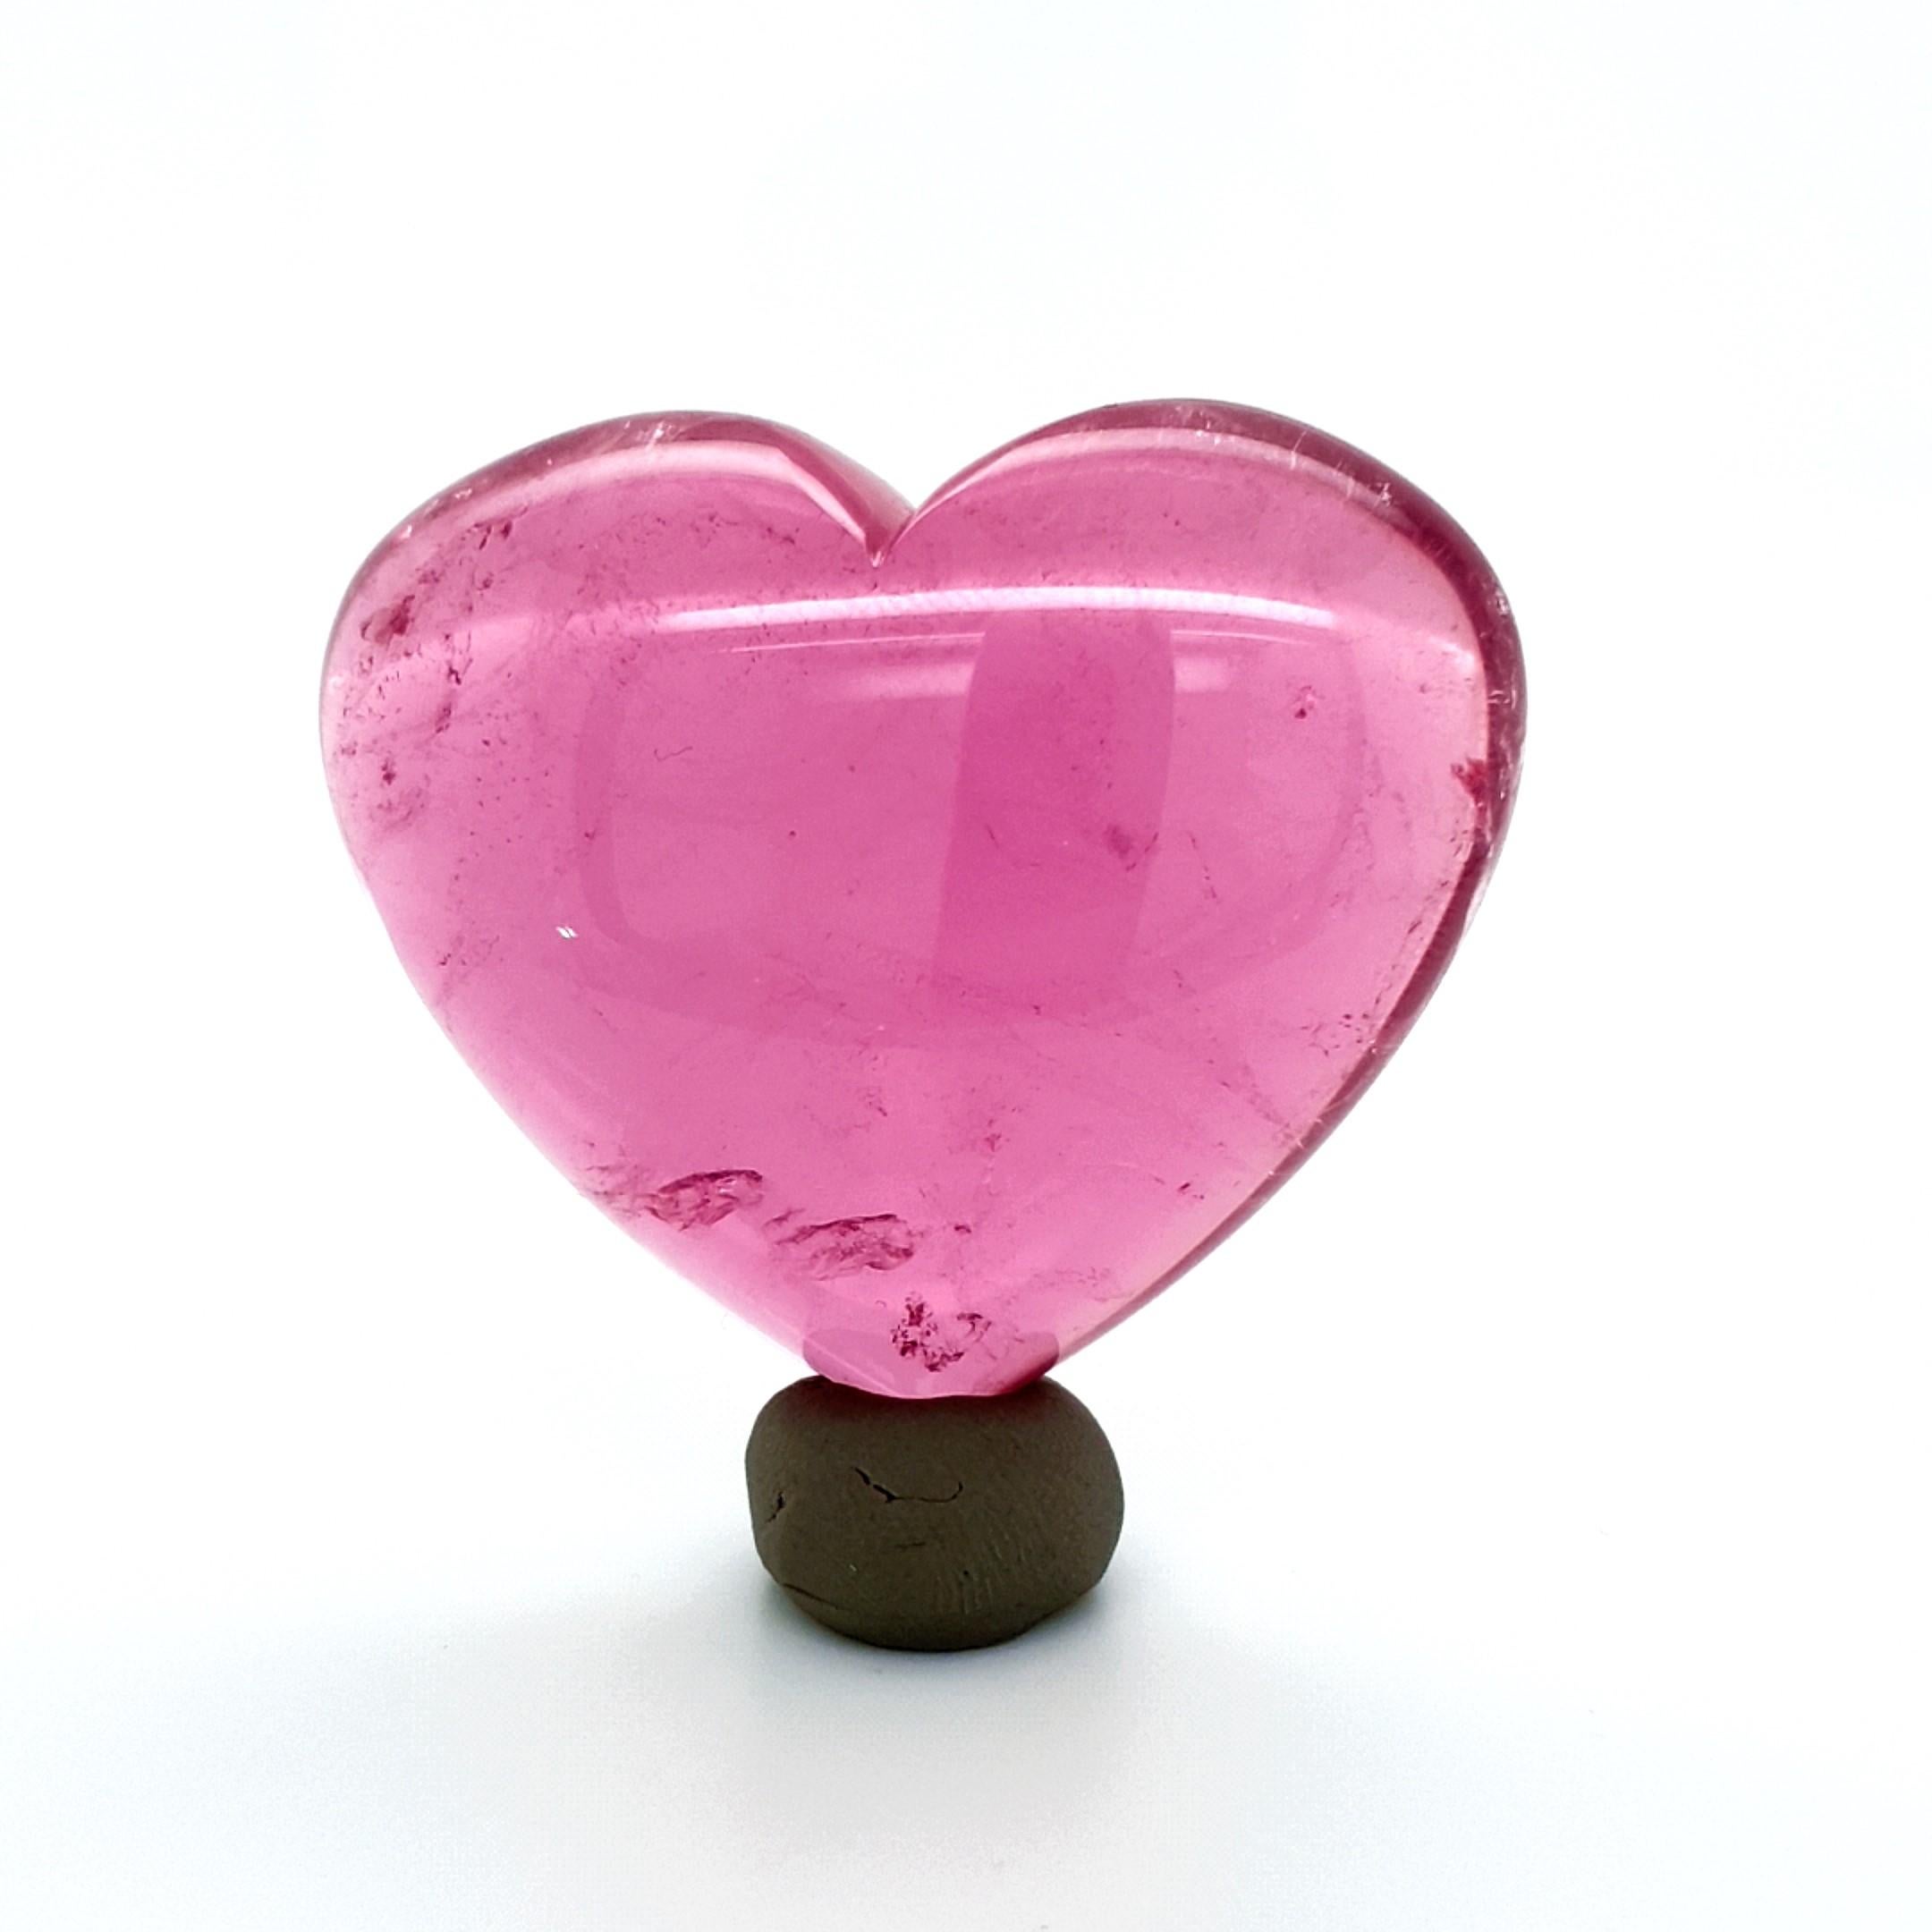 Due to its size, purity and color saturation, this tourmaline heart is incredibly rare !!!

measures: 49 x 42 x 15,5 mm

weight: 257,54 ct.